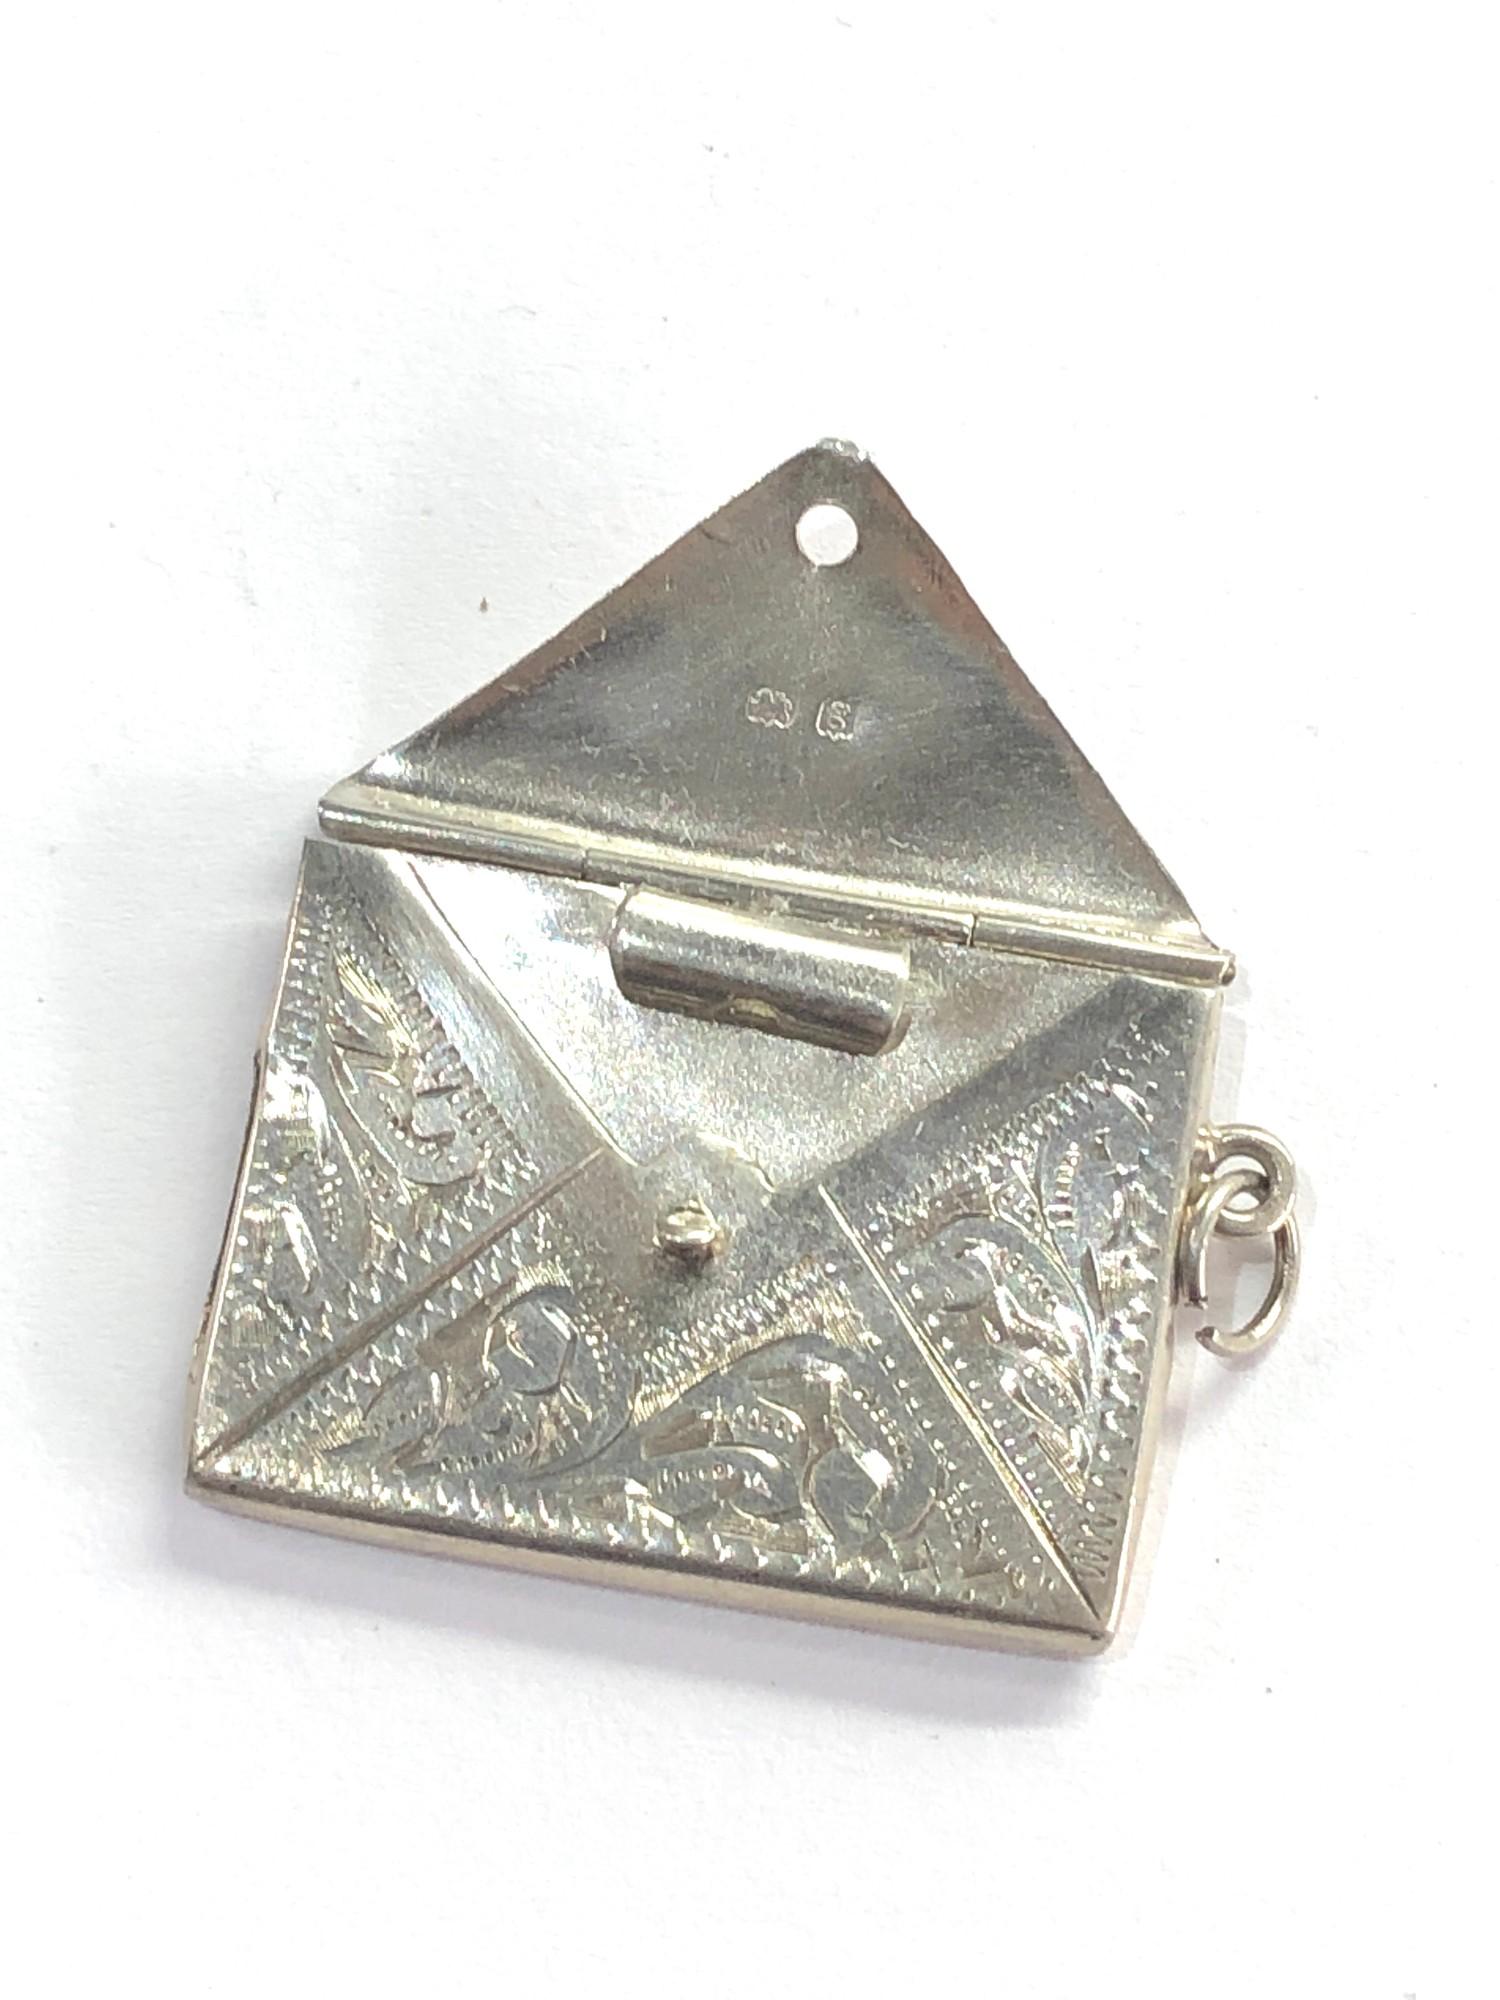 Small antique silver envelope stamp case Birmingham silver hallmarks please see images fordetails